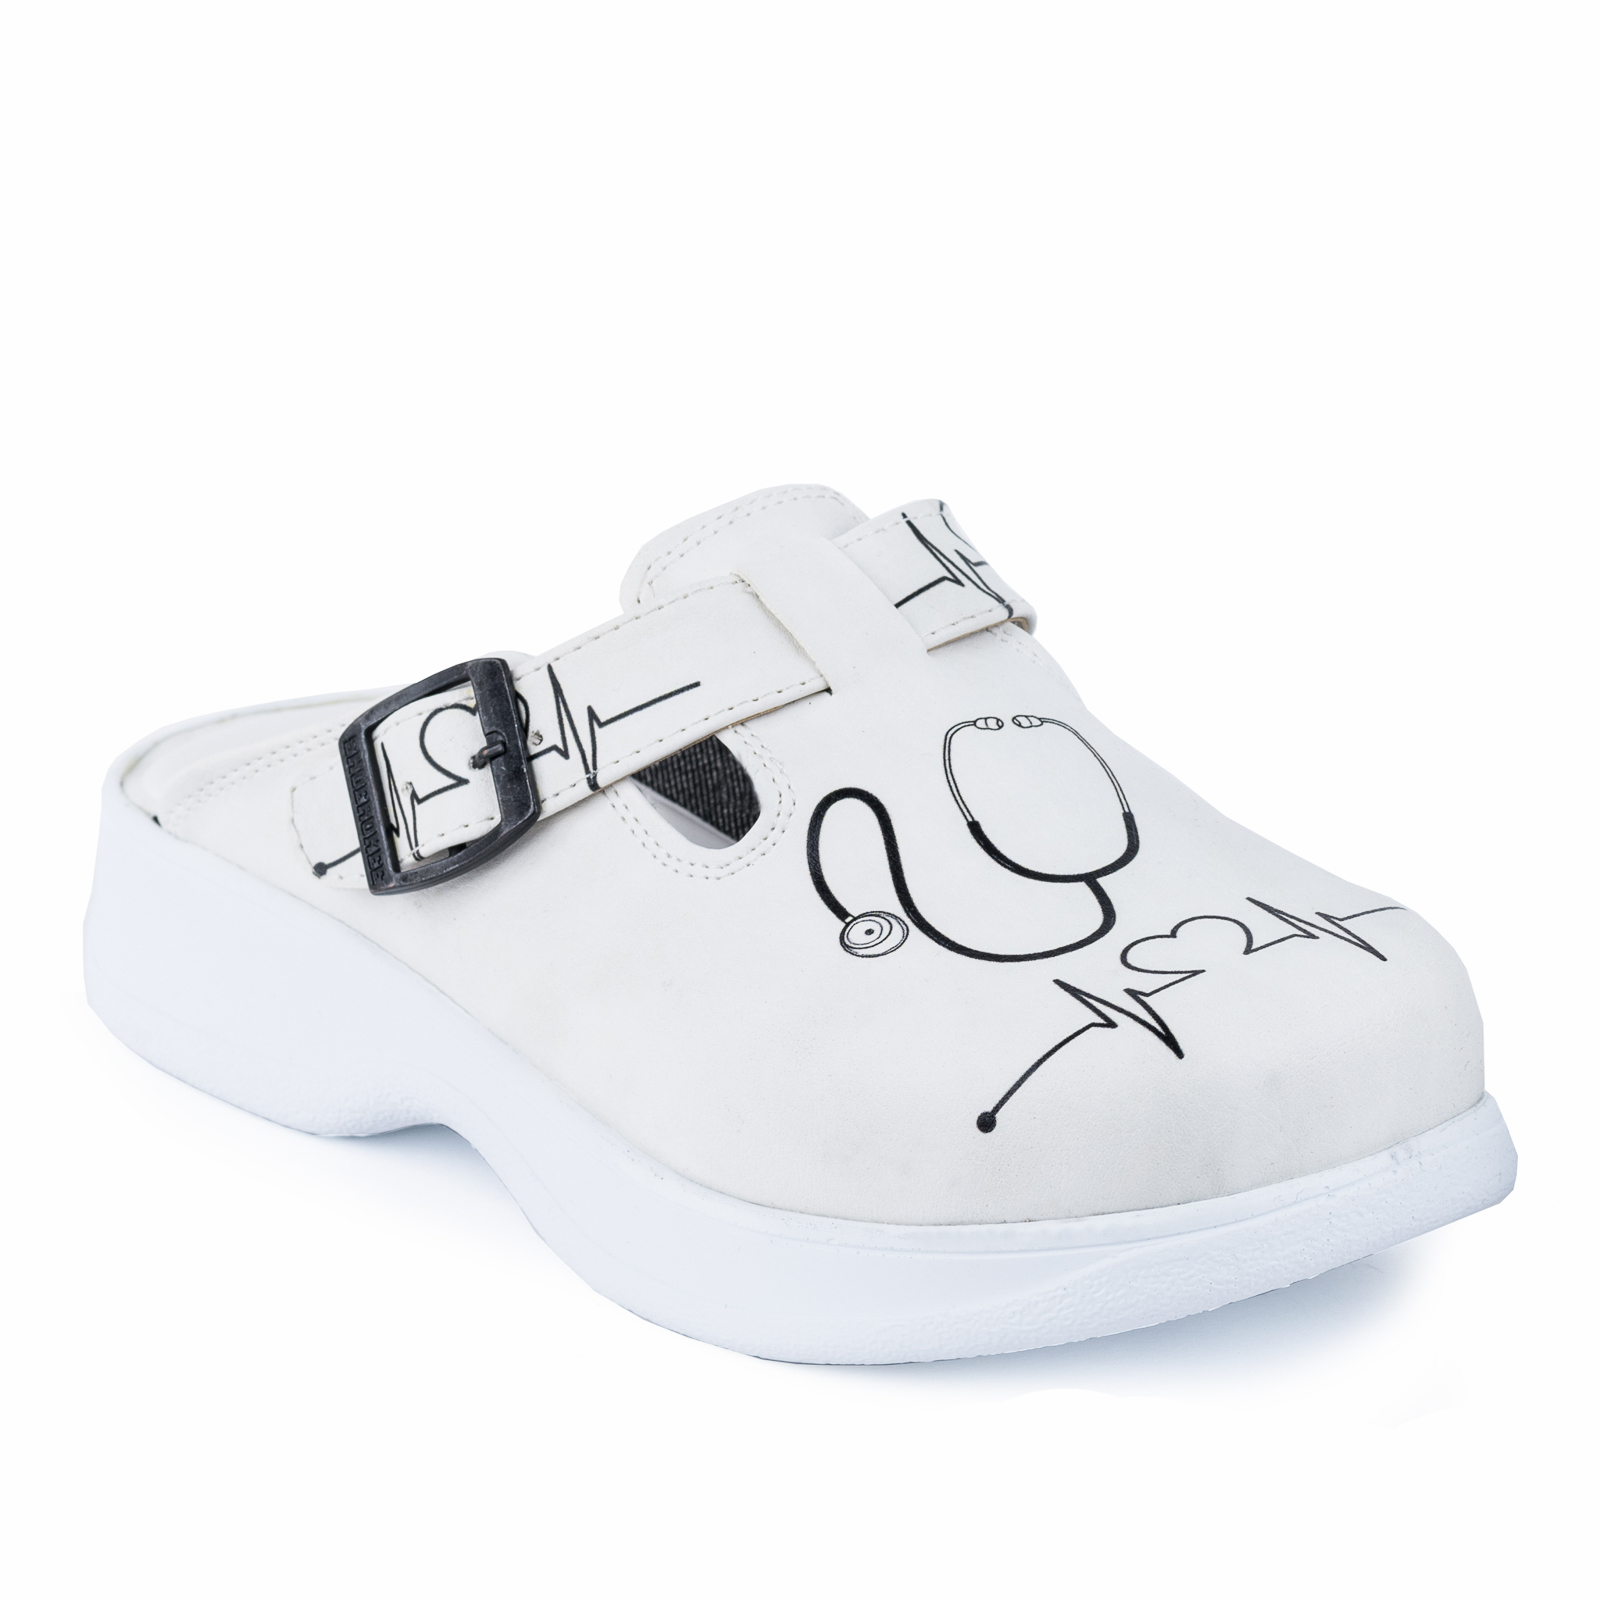 Patterned women clogs A042 - DOCTOR - WHITE